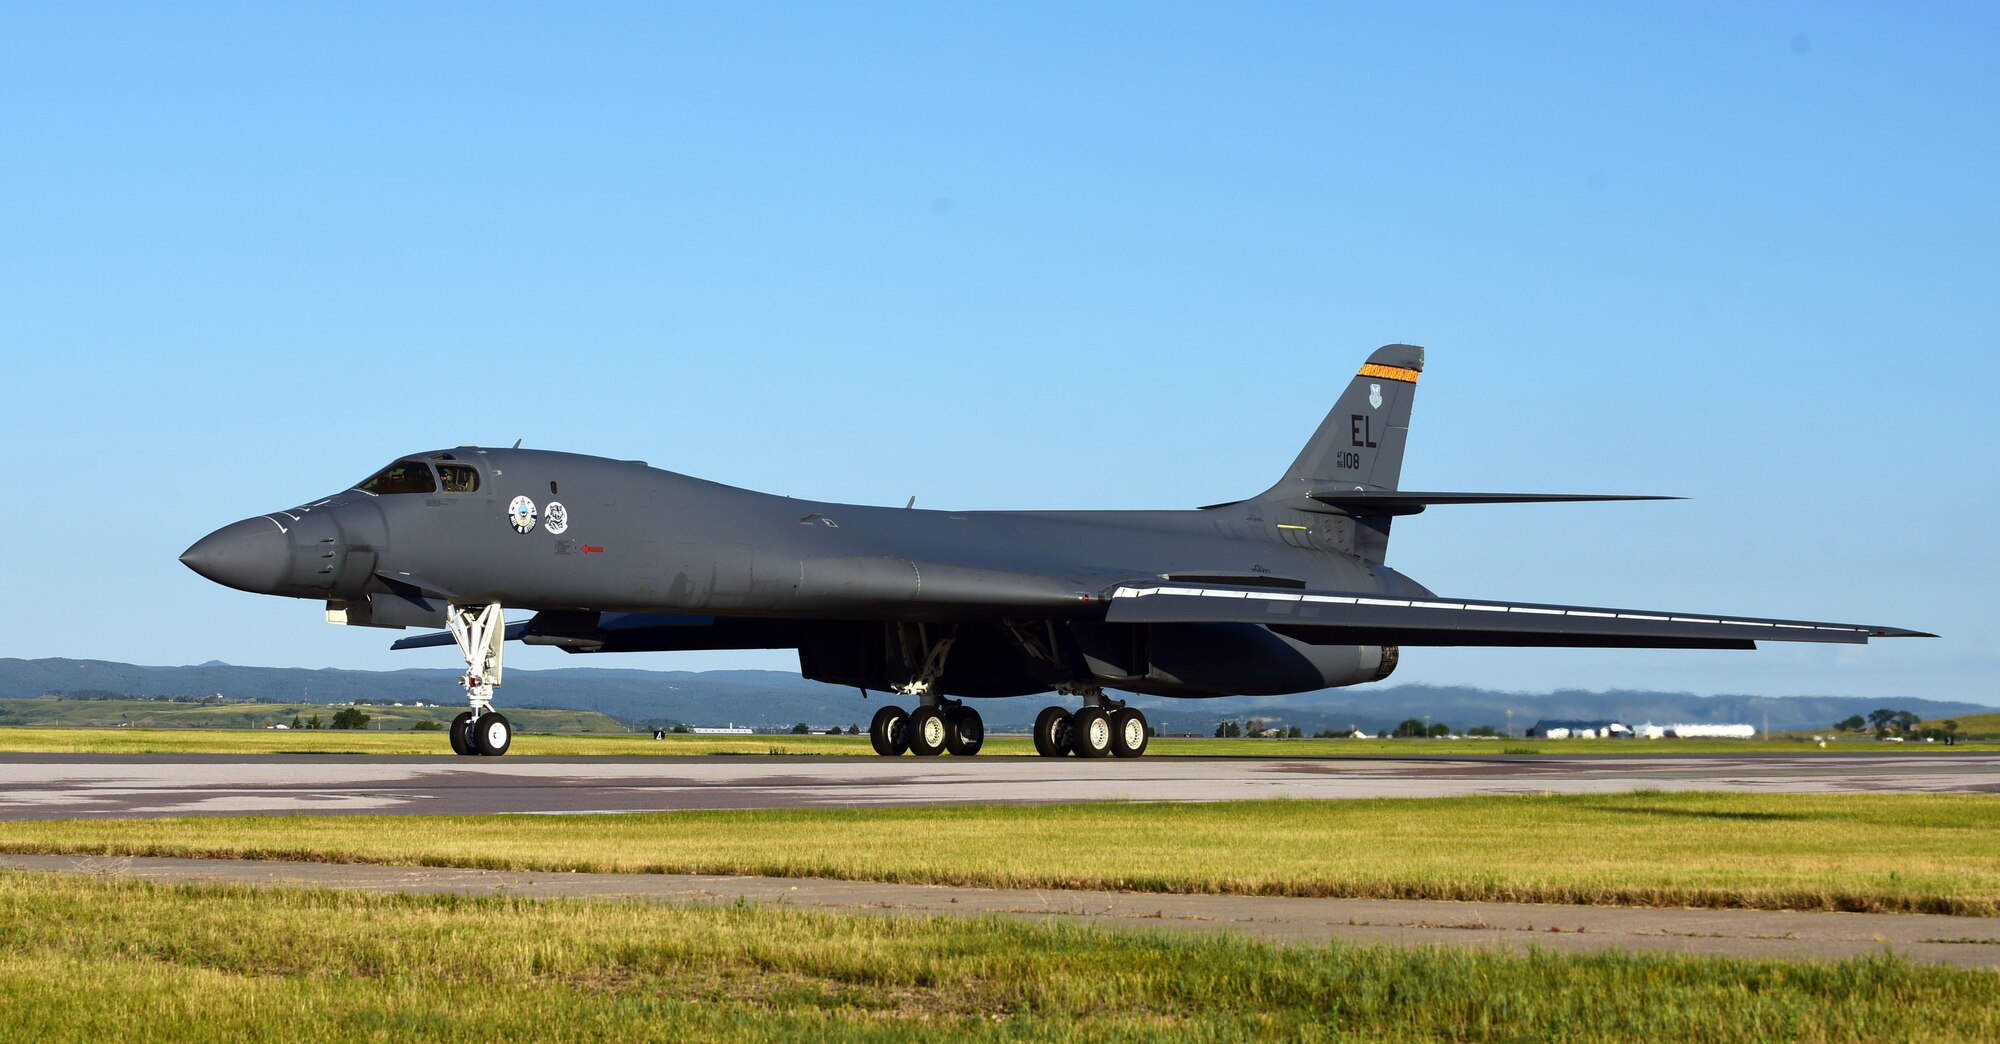 A B-1B Lancer assigned to the 37th Bomb Squadron taxis on the flightline at Ellsworth Air Force Base, S.D., July 16, 2020. Approximately 170 members and two B-1s deployed to Andersen Air Force Base, Guam, as part of a Bomber Task Force deployment, demonstrating the U.S. Indo-Pacific Command’s continuing commitment to allies and partners in the region. (U.S. Air Force photo by Airman 1st Class Quentin K. Marx)